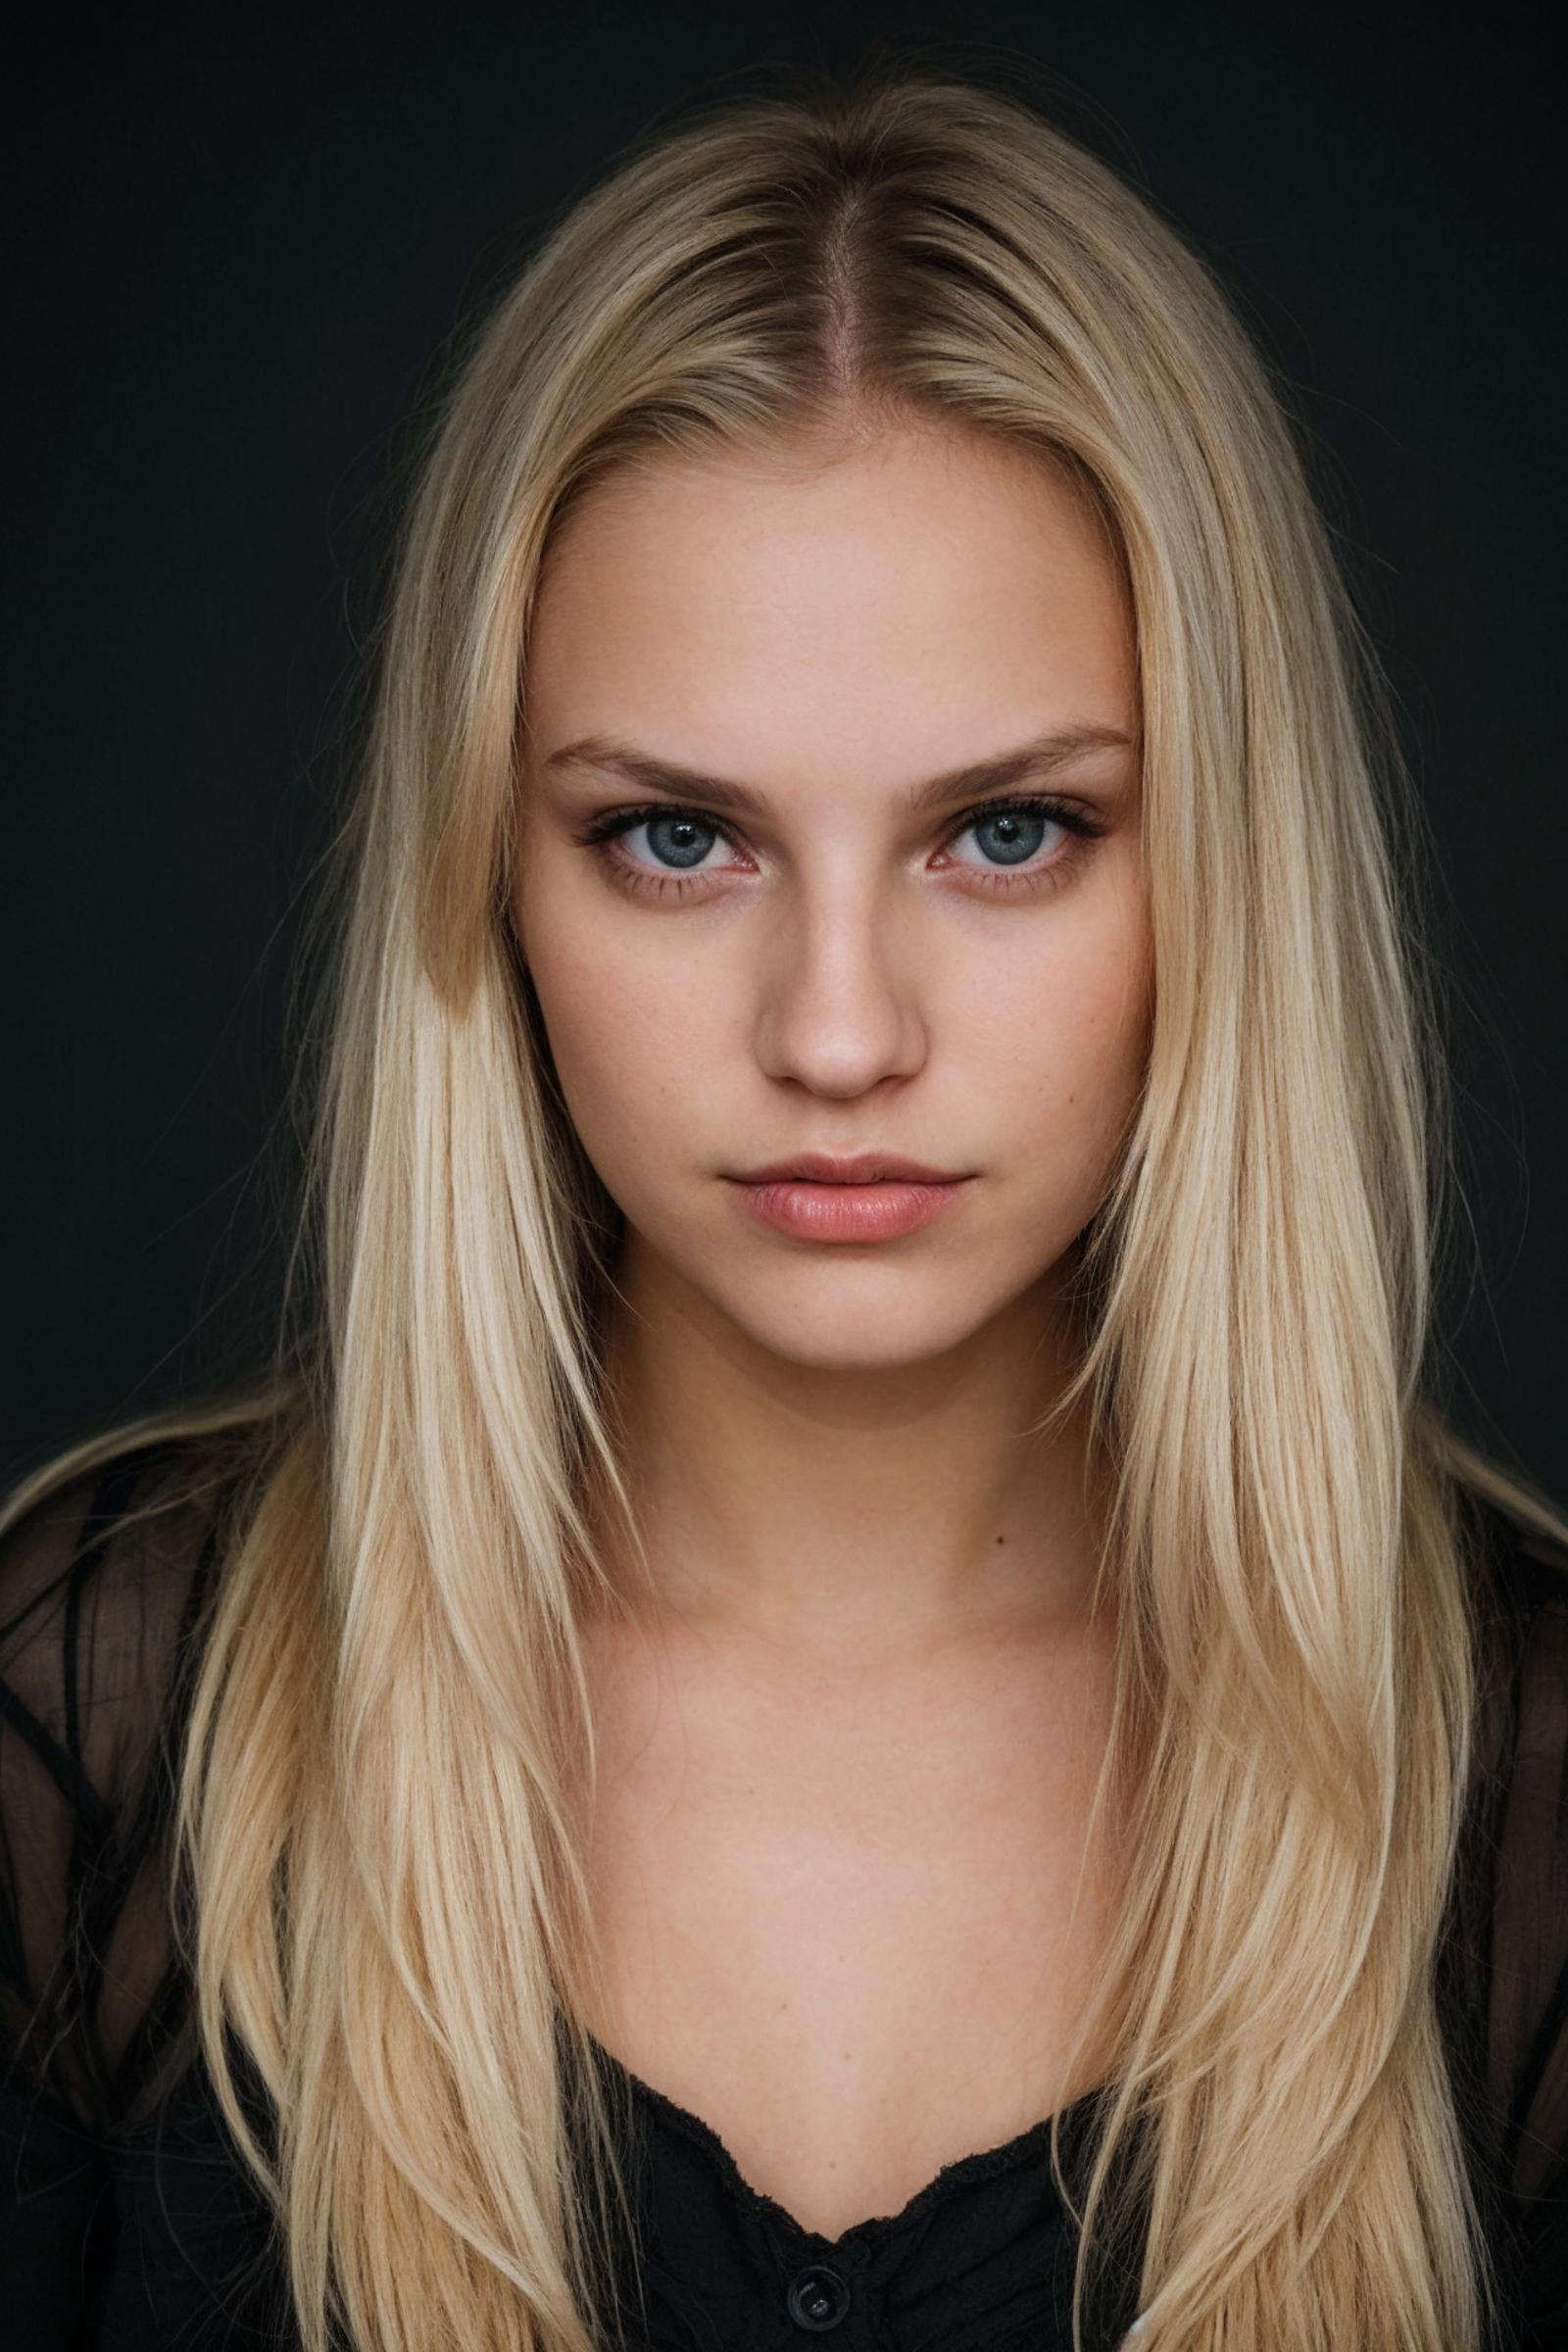 Blonde Woman with Blue Eyes Staring at the Camera